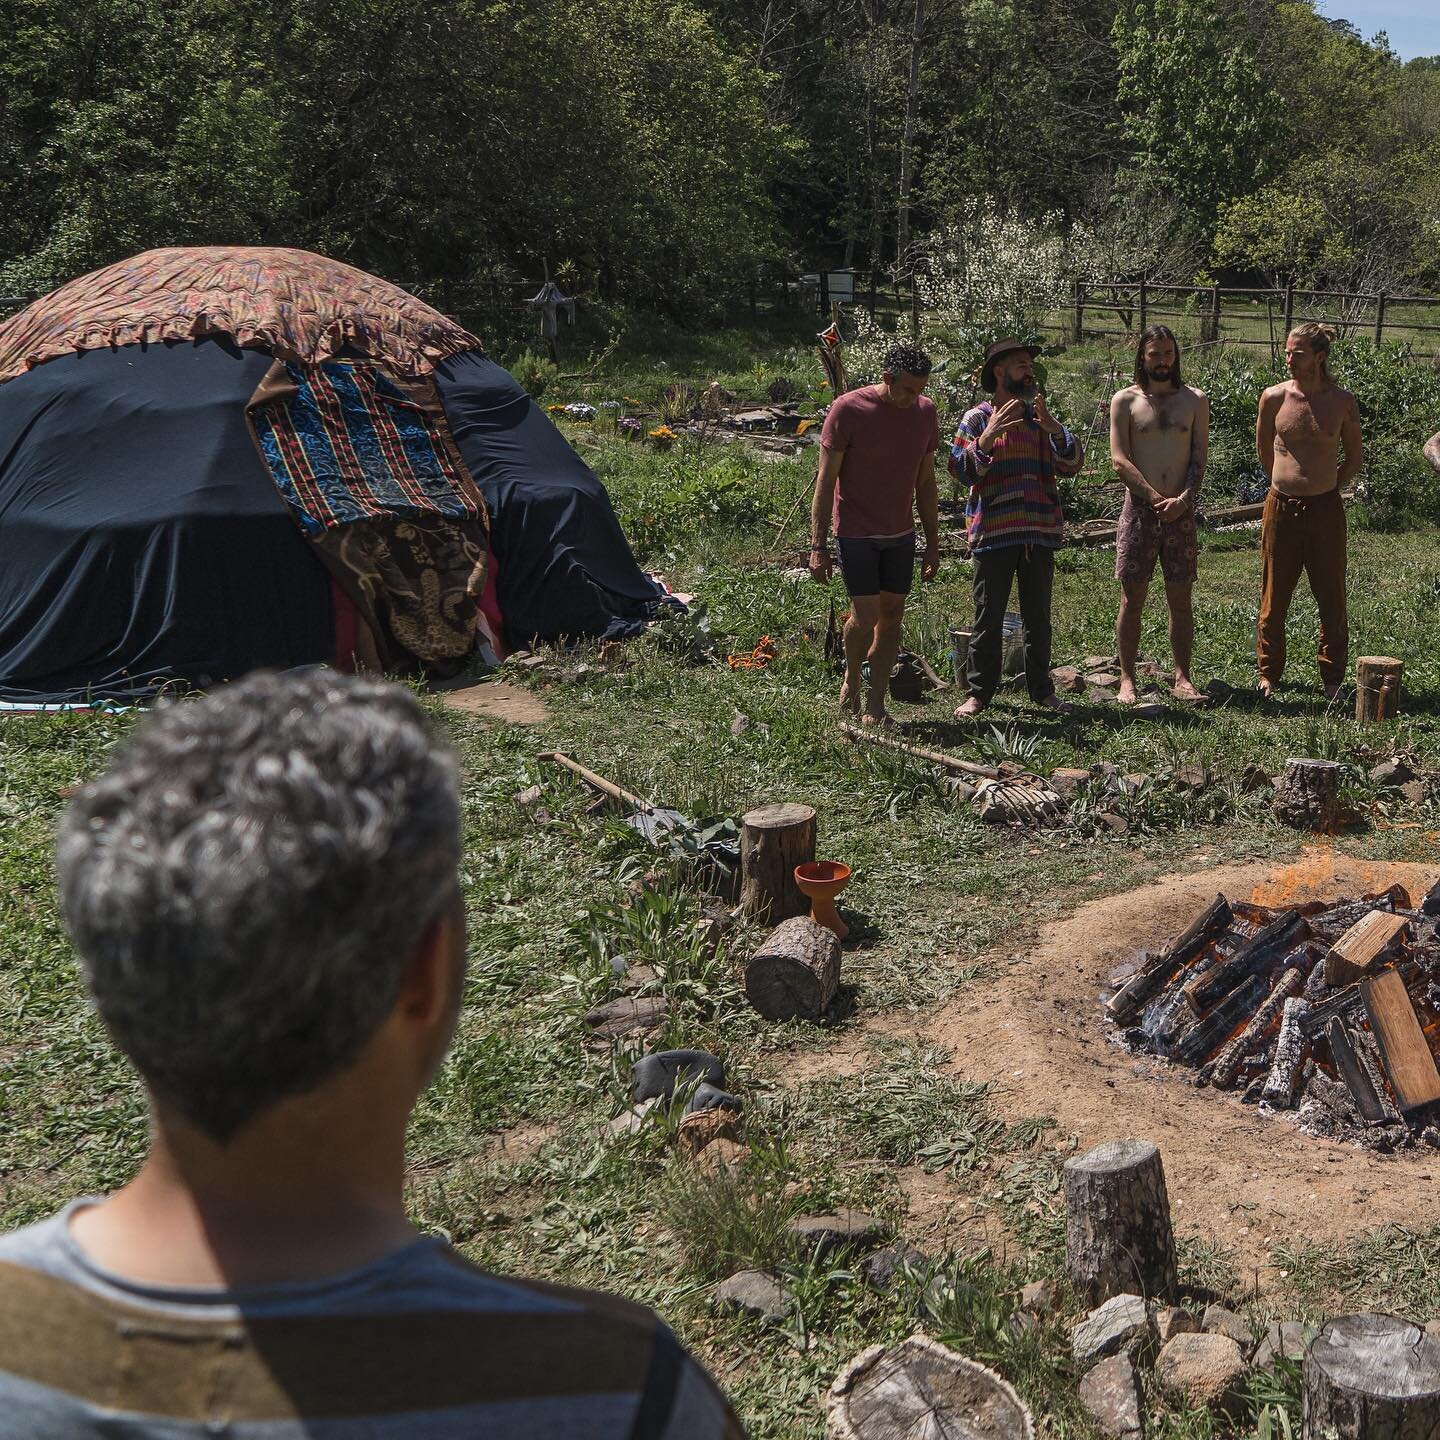 Temazcal.

The Temazcal is a powerful sweat lodge ritual, originating with the indigenous peoples of Mesoamerica. The ceremony is a means of physical, emotional, mental and spiritual purification and cleansing.

At our upcoming Initiation retreat, we